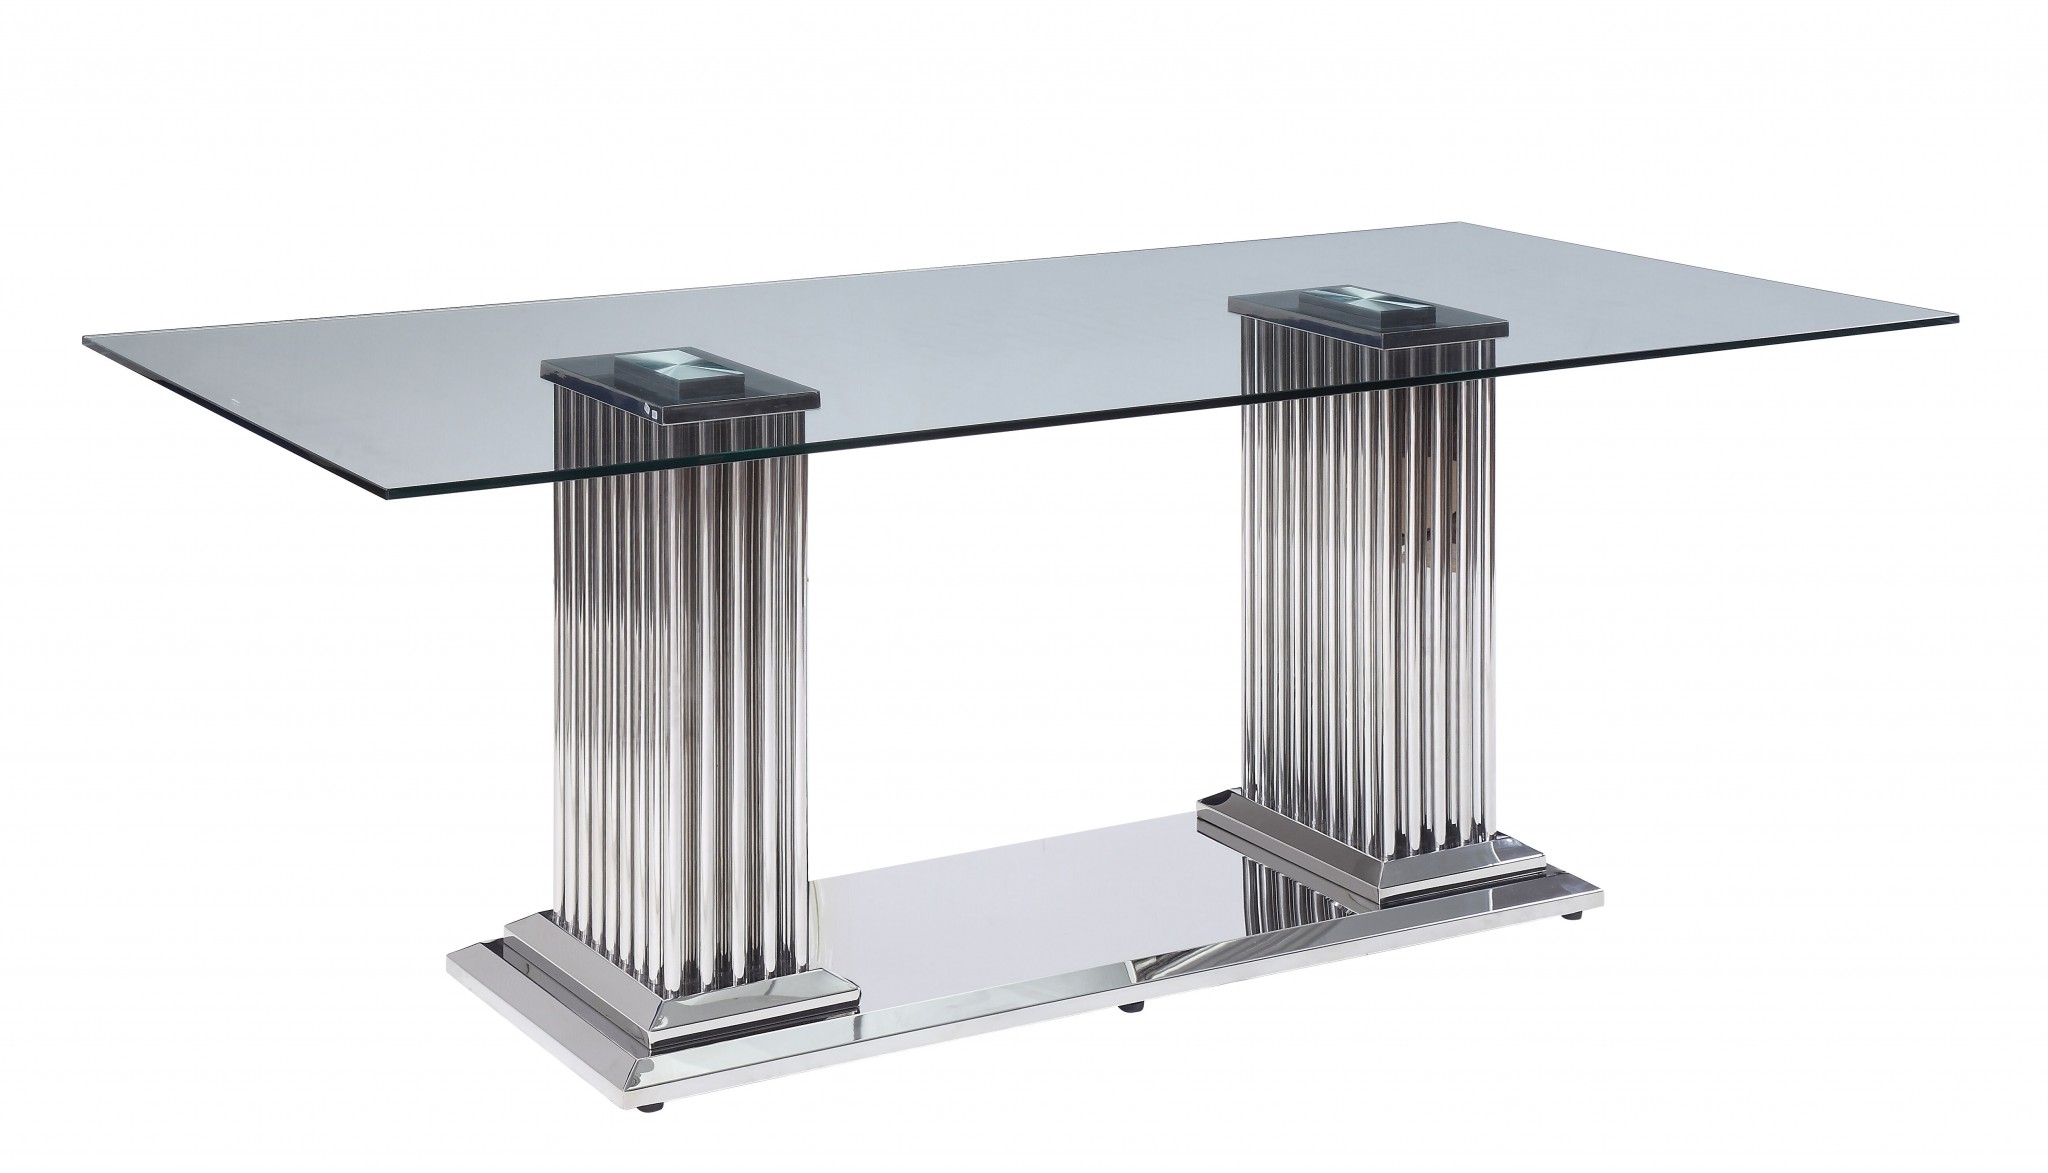 39" X 79" X 30" Stainless Steel Clear Glass Mirror Dining Table wDouble Pedestal